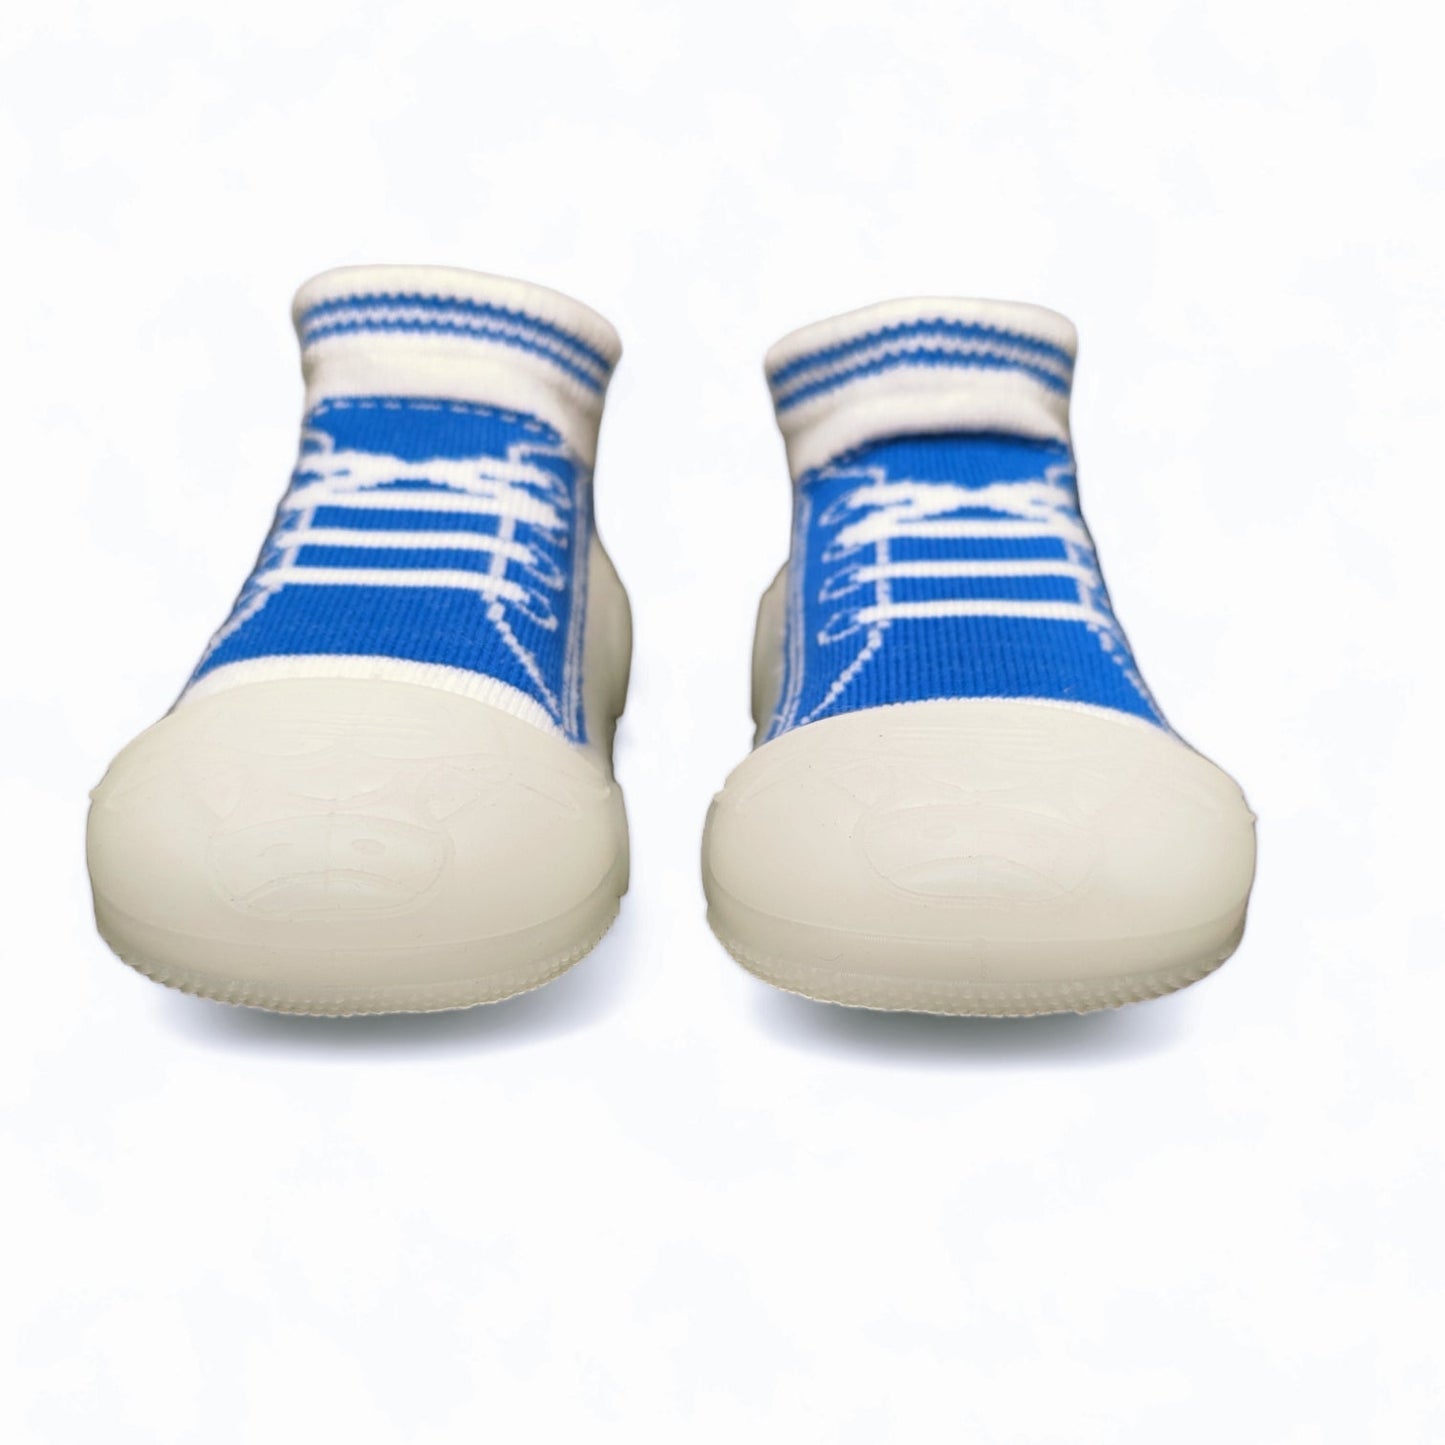 Blue Fast Back by Bearba-Sock Shoes for First Time Walkers- Sizes XS,S,M-Non slip soles- Machine washable- Boys - Bearba